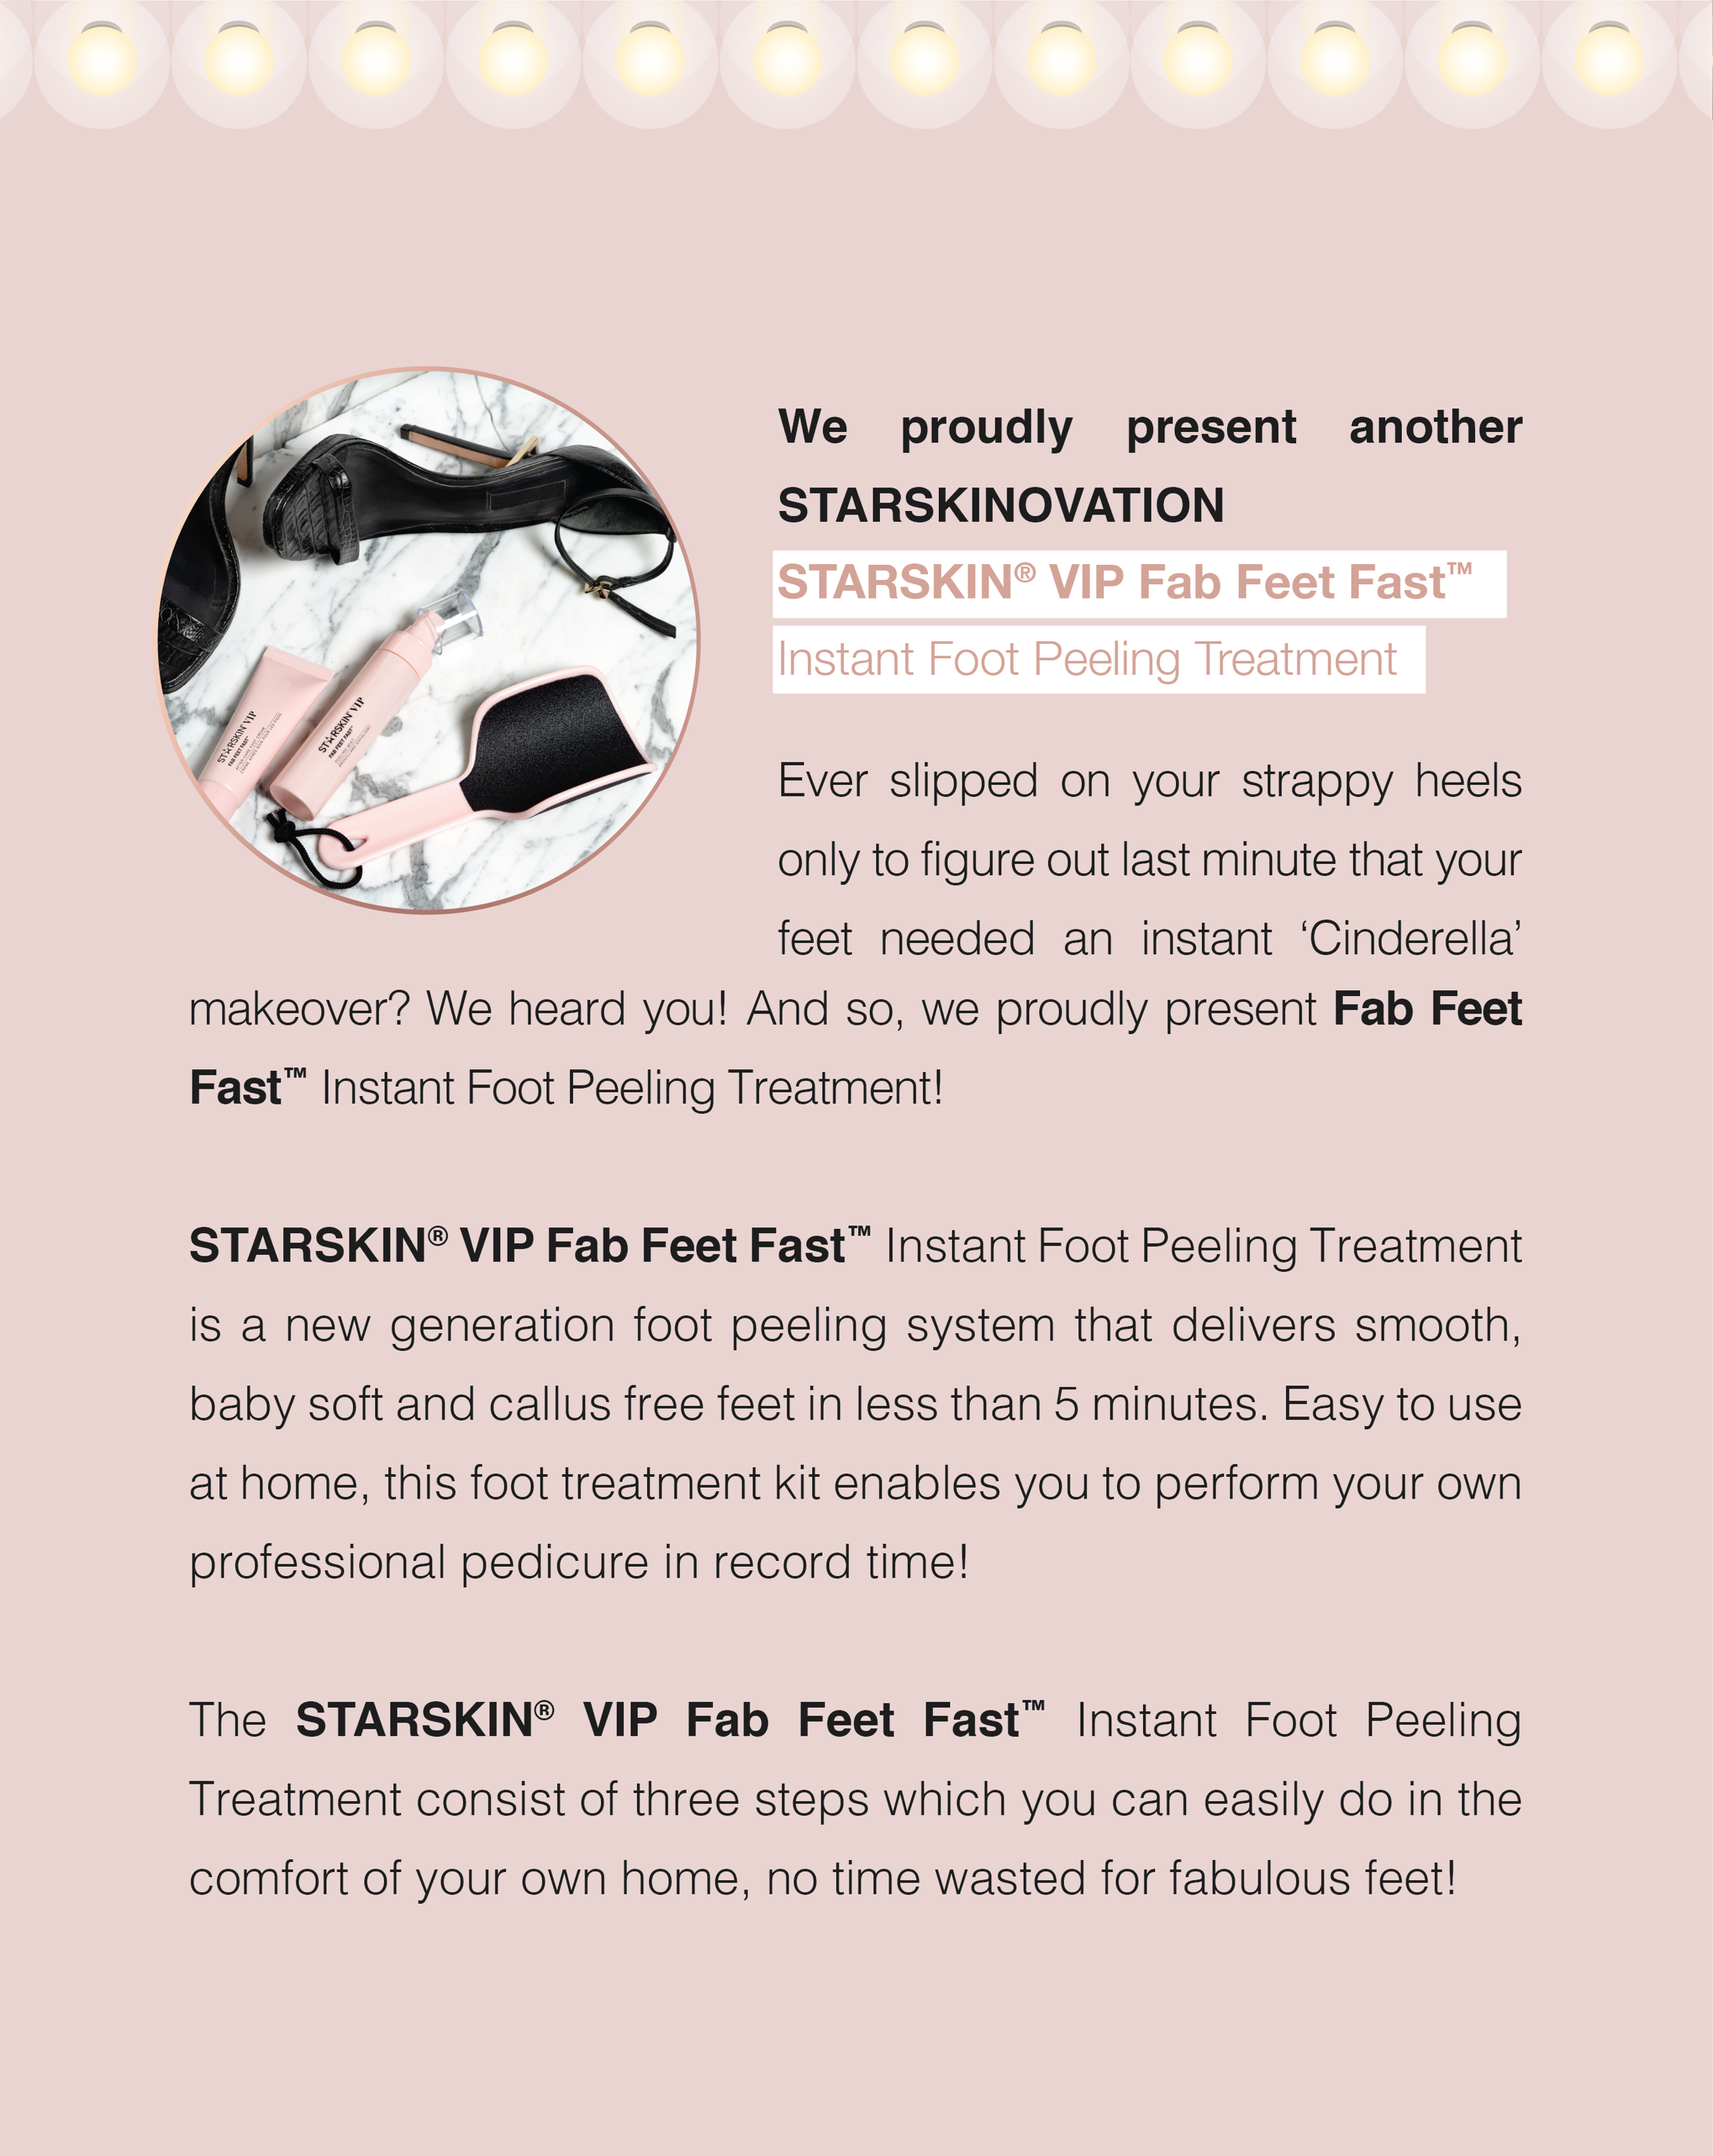 We proudly present another STARSKINOVATION STARSKIN® VIP Fab Feet Fast™ Instant Foot Peeling Treatment  Ever slipped on your strappy heels only to figure out last minute that your feet needed an instant ‘Cinderella’ makeover? We heard you! And so, we proudly present Fab Feet Fast™ Instant Foot Peeling Treatment! STARSKIN® VIP Fab Feet Fast™ Instant Foot Peeling Treatment is a new generation foot peeling system that delivers smooth, baby soft and callus free feet in less than 5 minutes. Easy to use at home, this foot treatment kit enables you to perform your own professional pedicure in record time!  The VIP Fab Feet Fast™ Instant Foot Peeling Treatment consist of three steps which you can easily do in the comfort of your own home, no time wasted for fabulous feet!